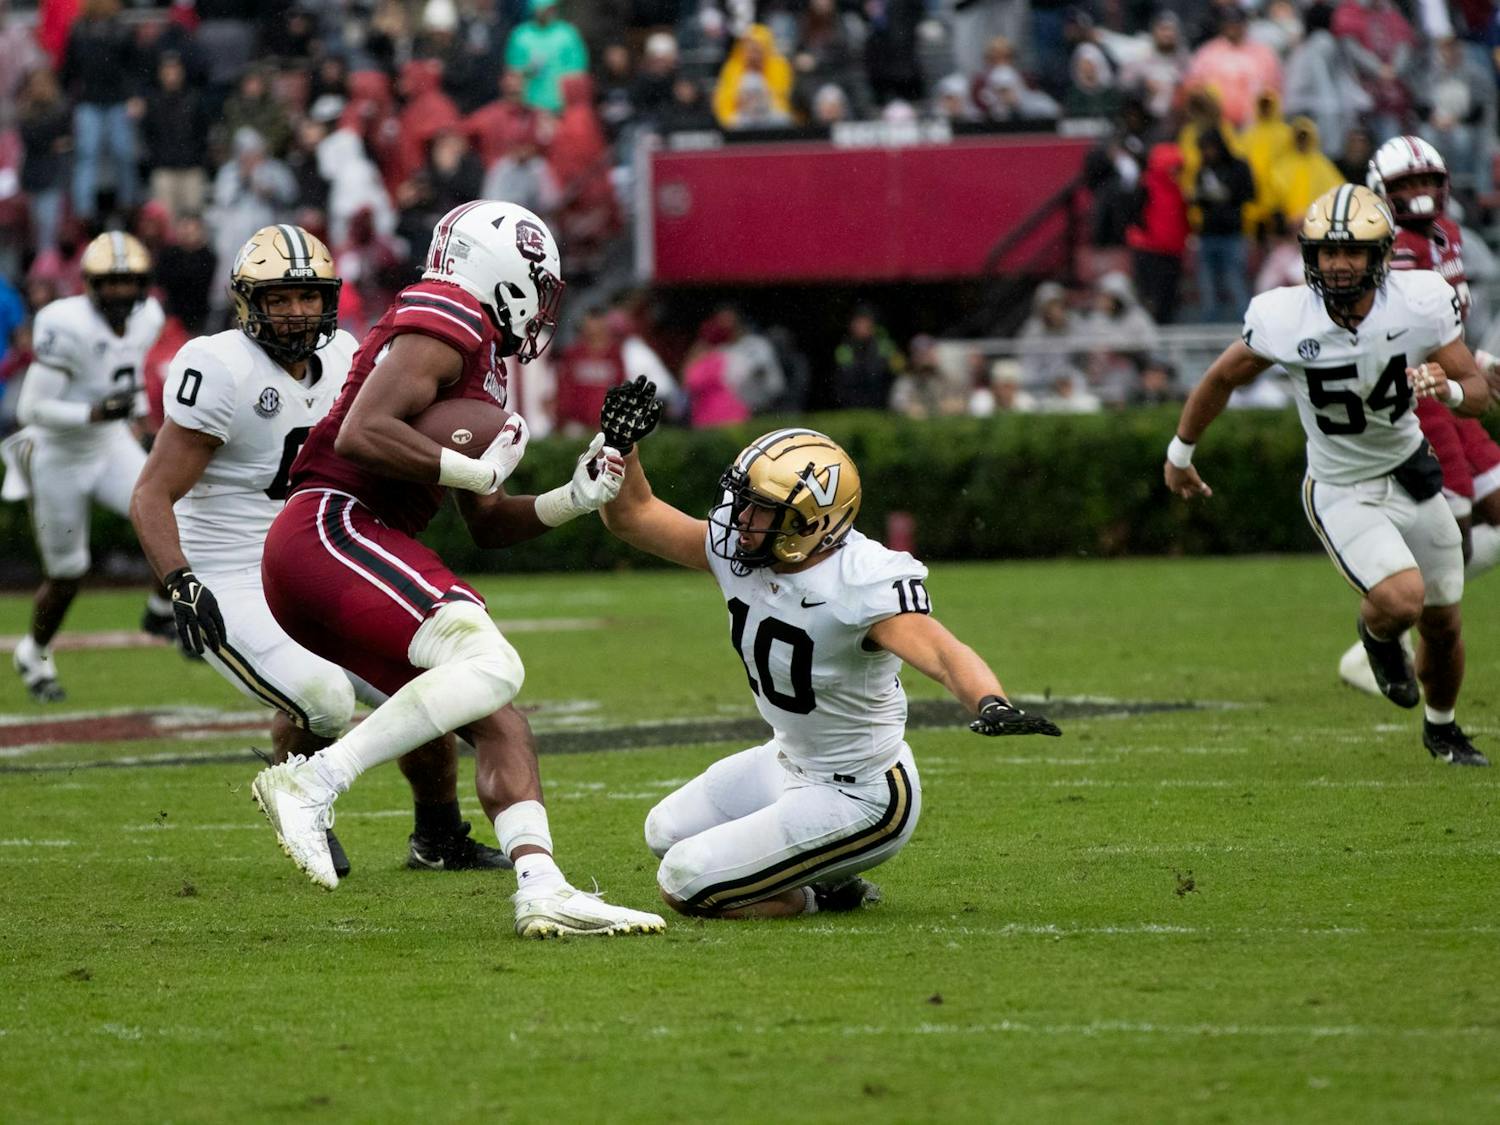 Graduate tight end Joshua Simon dodges a tackle at Williams-Brice Stadium on Nov. 11, 2023. Simon received six passes for 65 yards during the game.